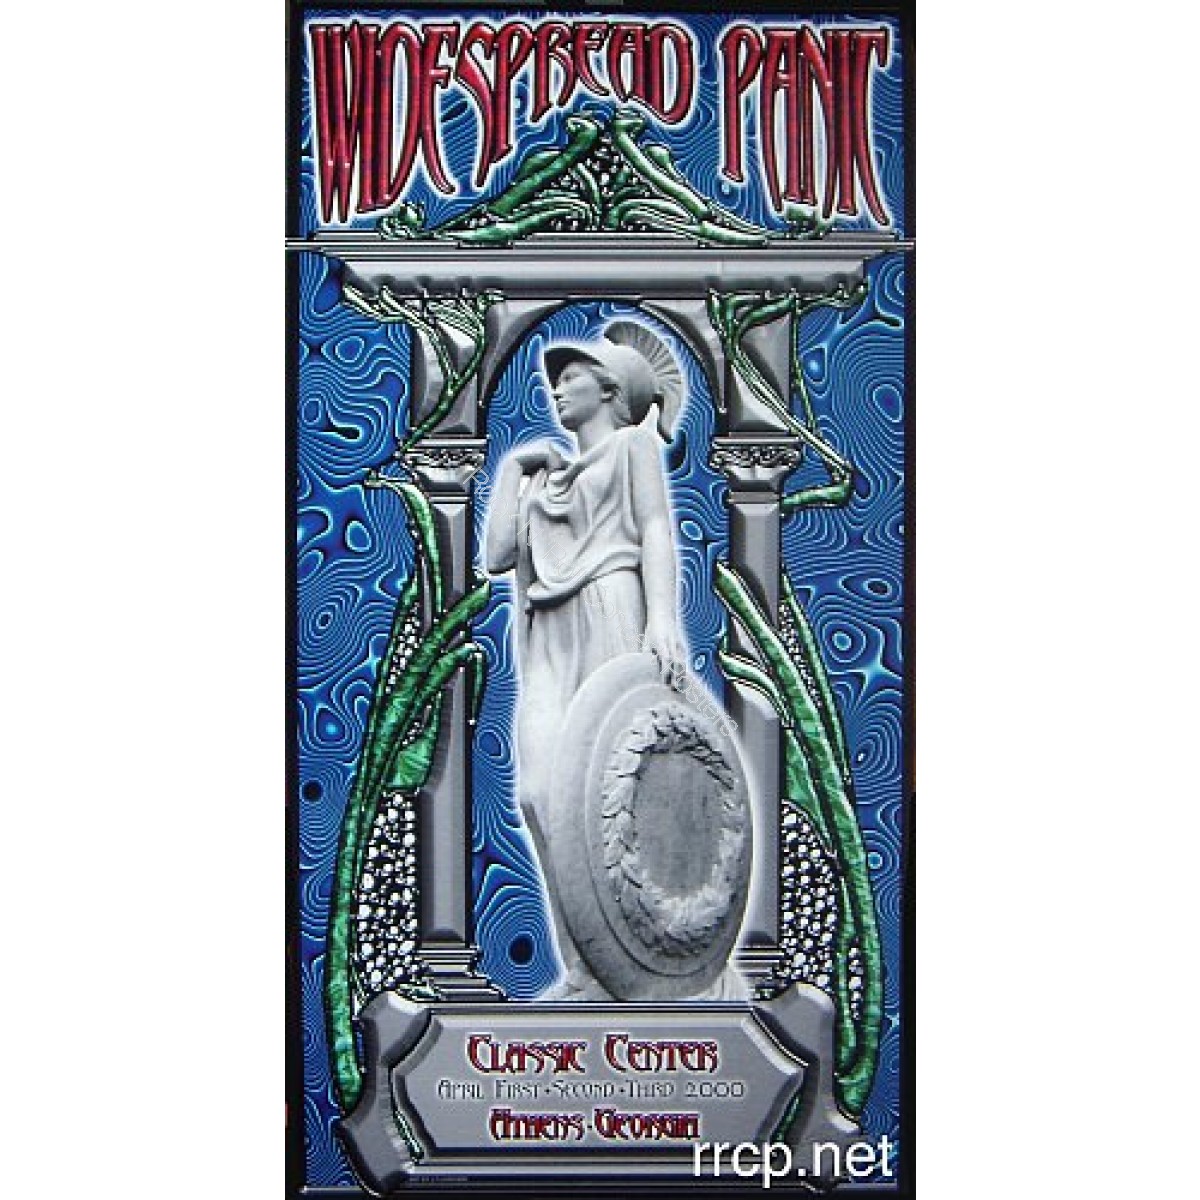 Widespread Panic @ The Classic Center Athens Georgia 4/1-3/00 Official S/N Limited Edition Poster 